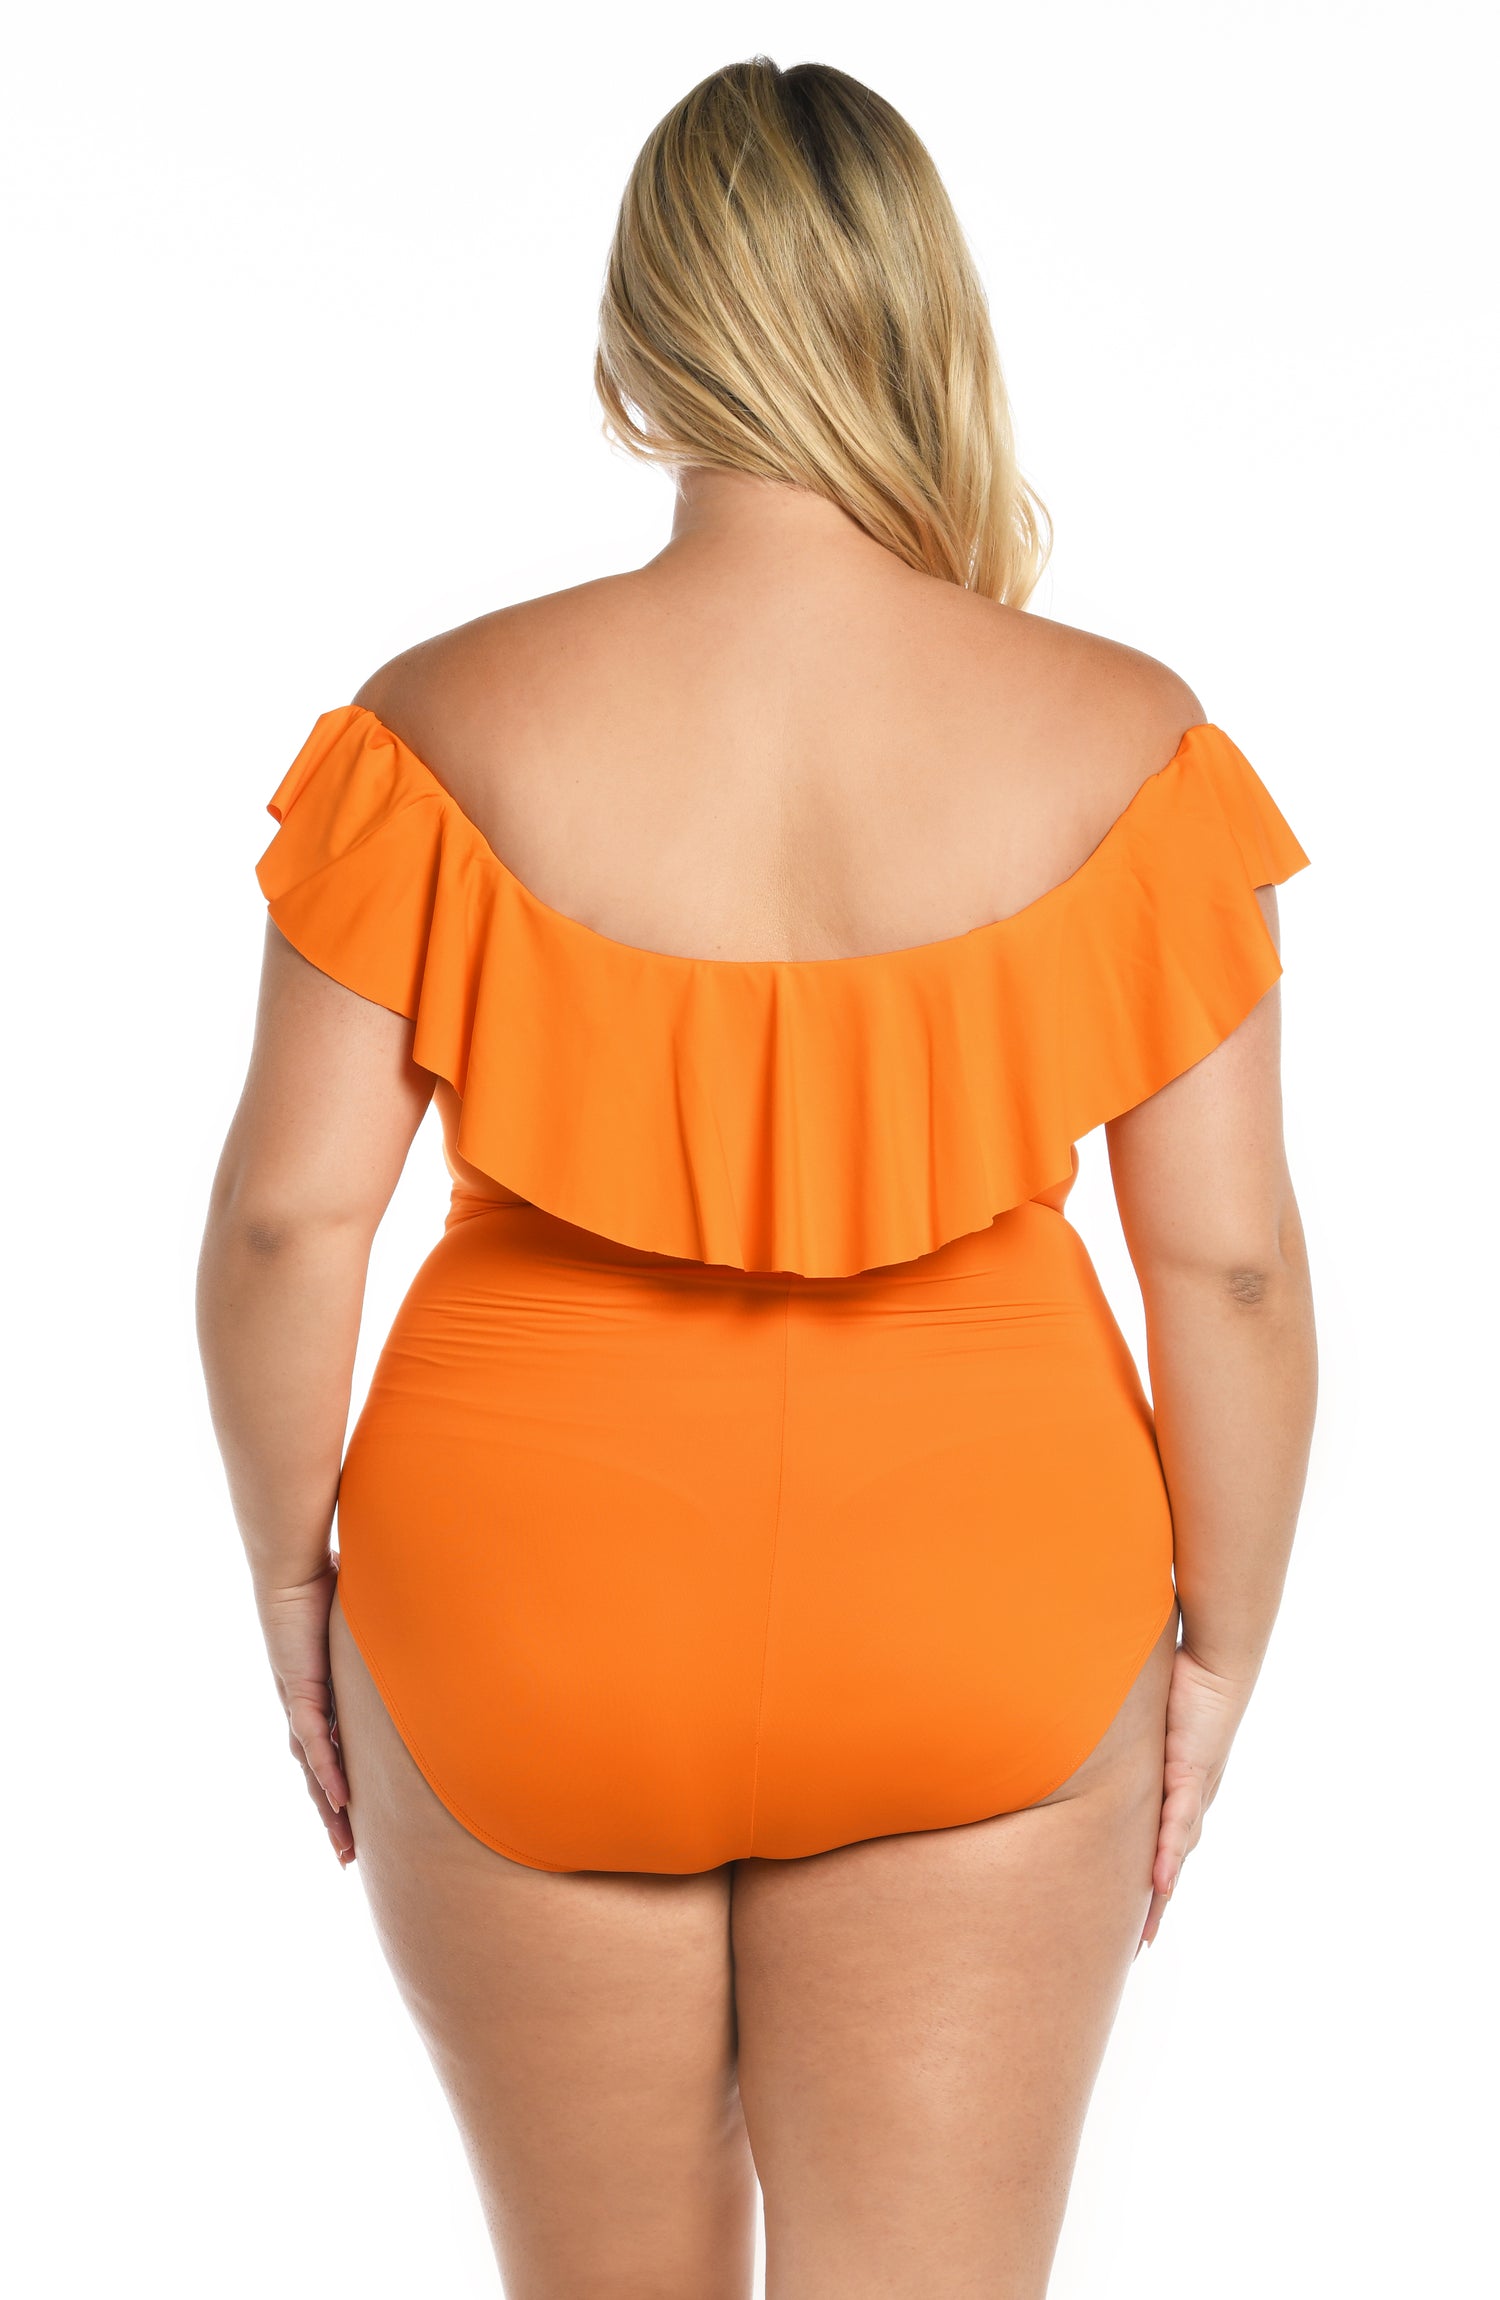 Model is wearing a tangerine colored one piece swimsuit from our Best-Selling Island Goddess collection.